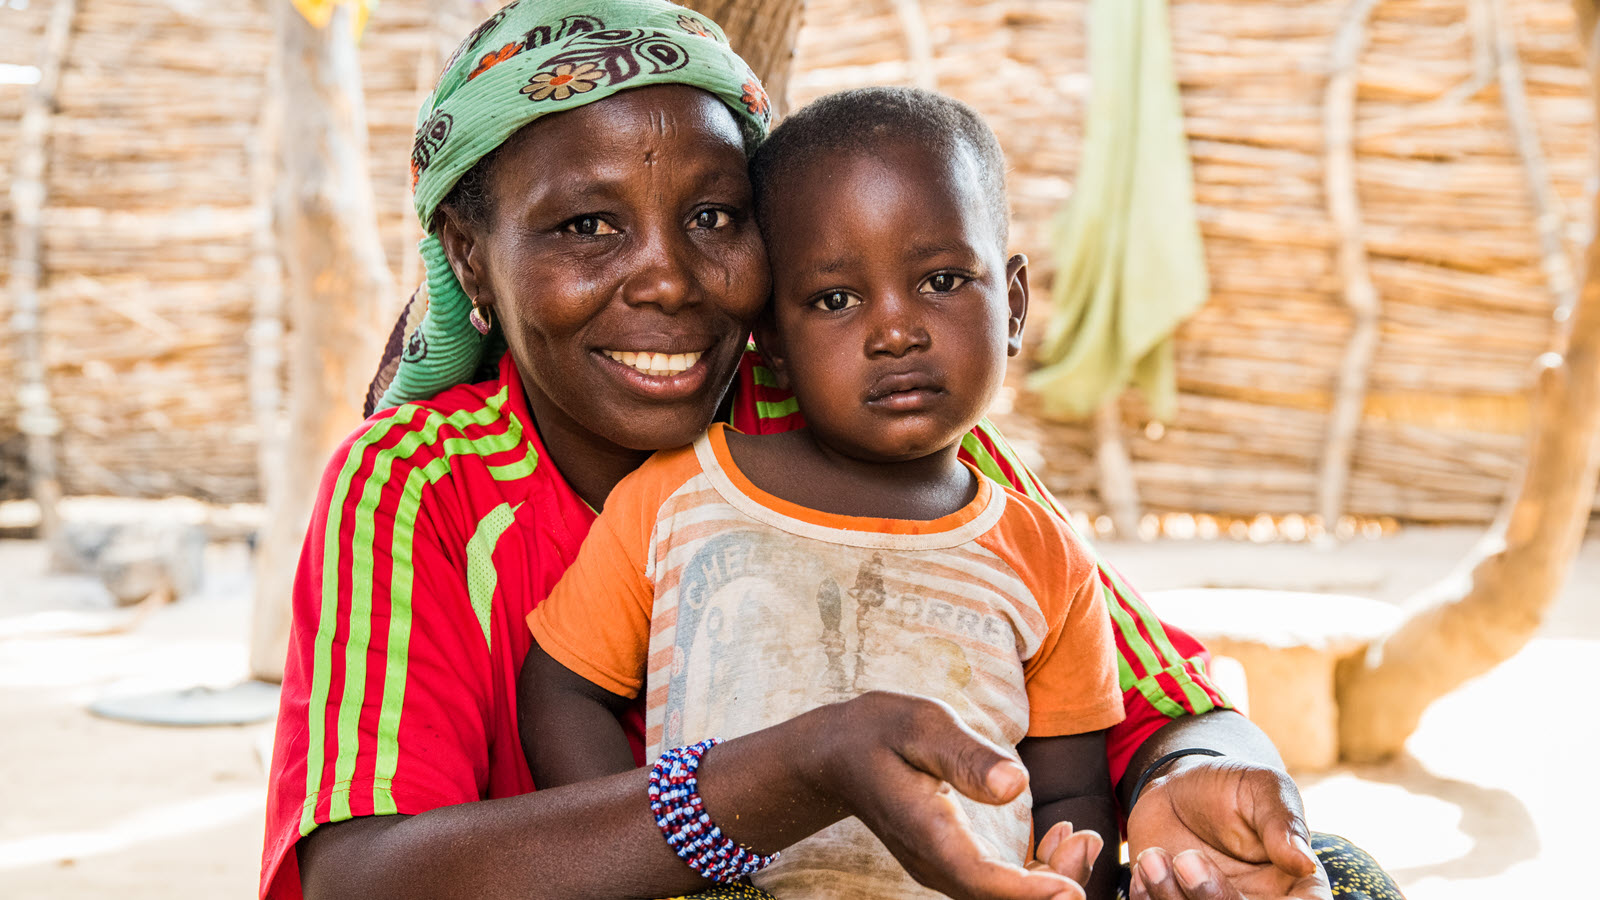 Safi Boubacar, 40 years old with her son Manssour Boubacar, 3 years in the village of Toumandey, Dosso region, Niger on April 23, 2017. Manssour has just received the polio vaccination Biopolio B1/3, albendazole, a medication used for the treatment of a variety of parasitic worm infestations and a vitamin A oral liquid preparation. 